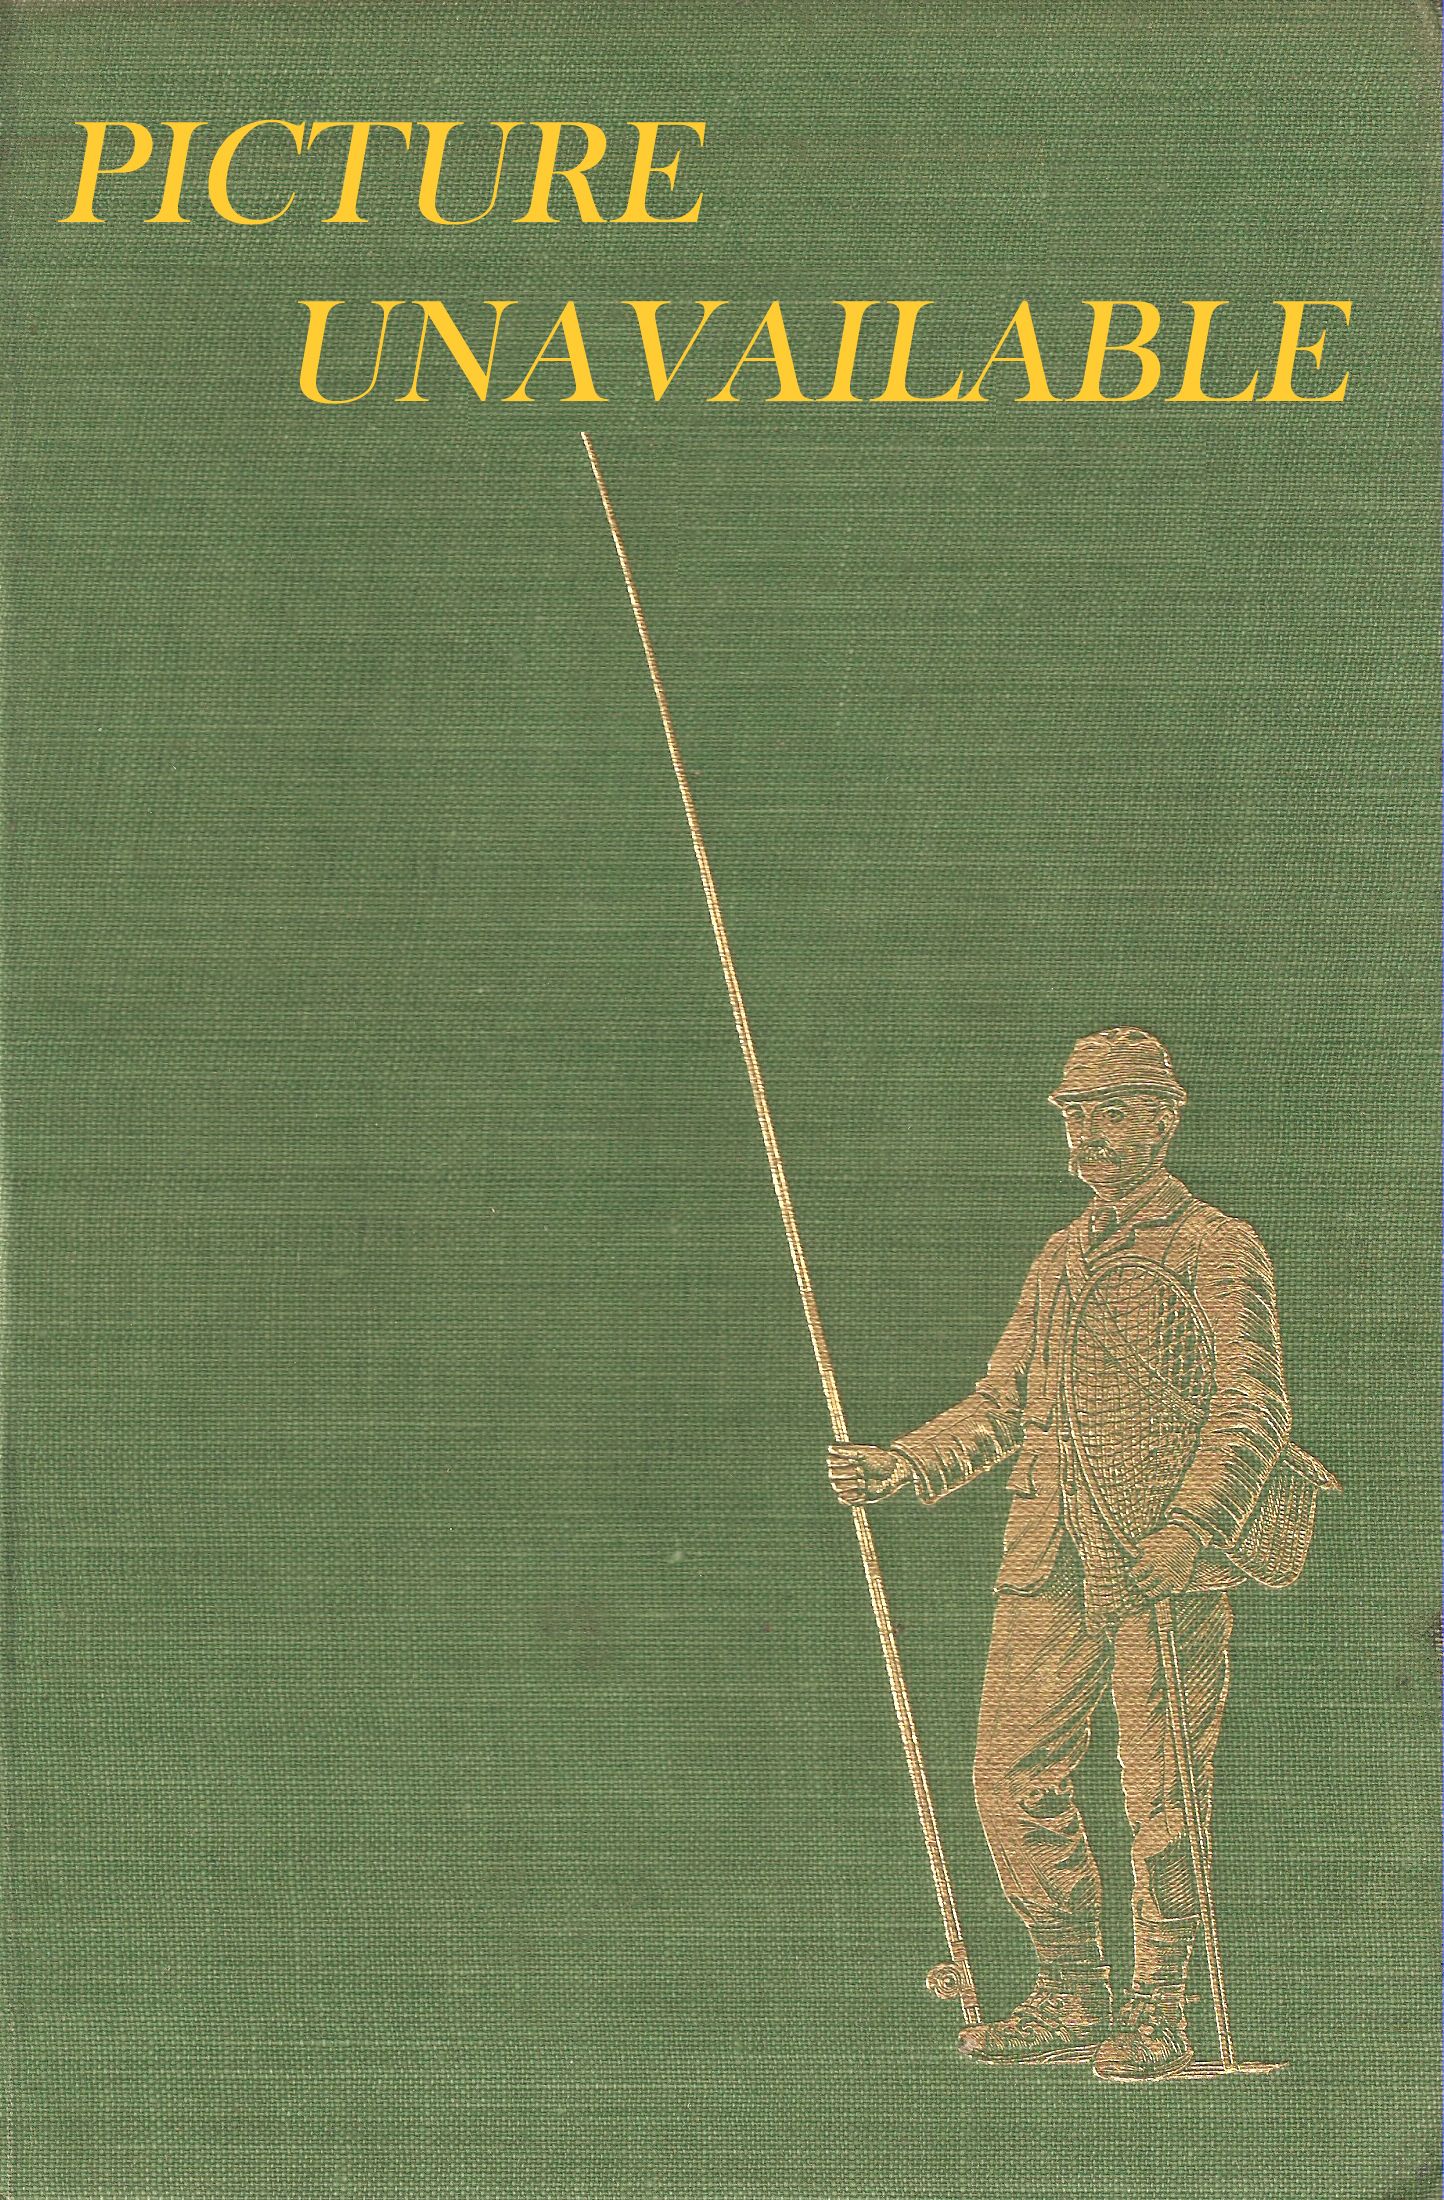 THE COMPLEAT ANGLER'S WIFE: A COMPLETE GUIDE TO COOKING THE ANGLER'S  CATCH. By Suzanne Beedell.